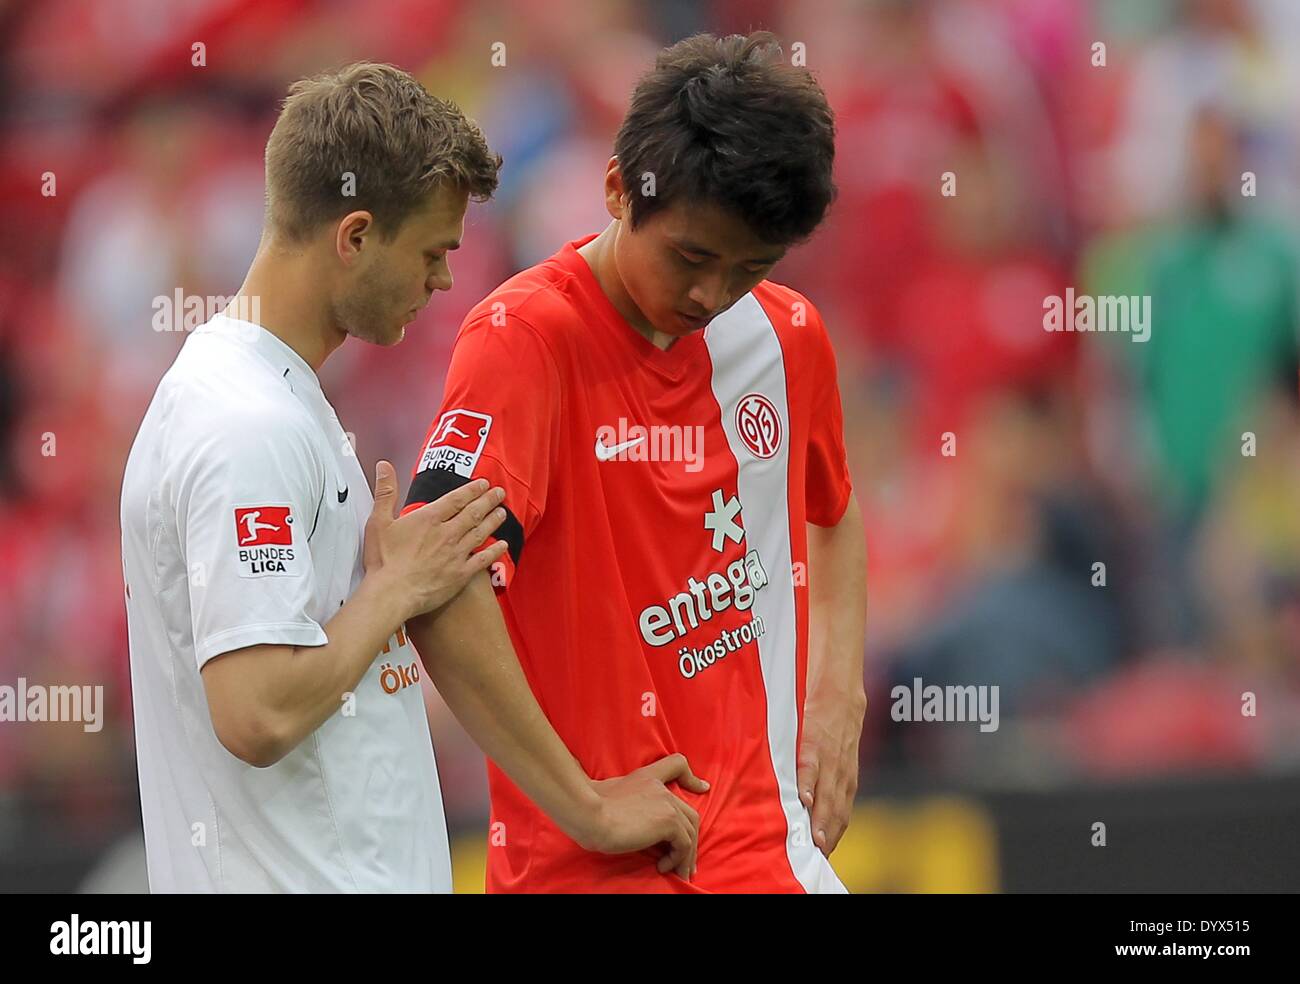 Mainz, Germany. 26th Apr, 2014. Mainz' Ja-Cheol Koo (R), who is from South Korea, looks at the black ribbon he wears to commemorate the victims of the South Korean ferry tragedy next to Benedikt Saller during the German soccer Bundesliga match between 1. FSV Mainz 05 and 1. FC Nuremberg at the Coface Arena in Mainz, Germany, 26 April 2014. Photo: FREDRIK VON ERICHSEN/dpa (ATTENTION: Due to the accreditation guidelines, the DFL only permits the publication and utilisation of up to 15 pictures per match on the internet and in online media during the match.)/dpa/Alamy Live News Stock Photo